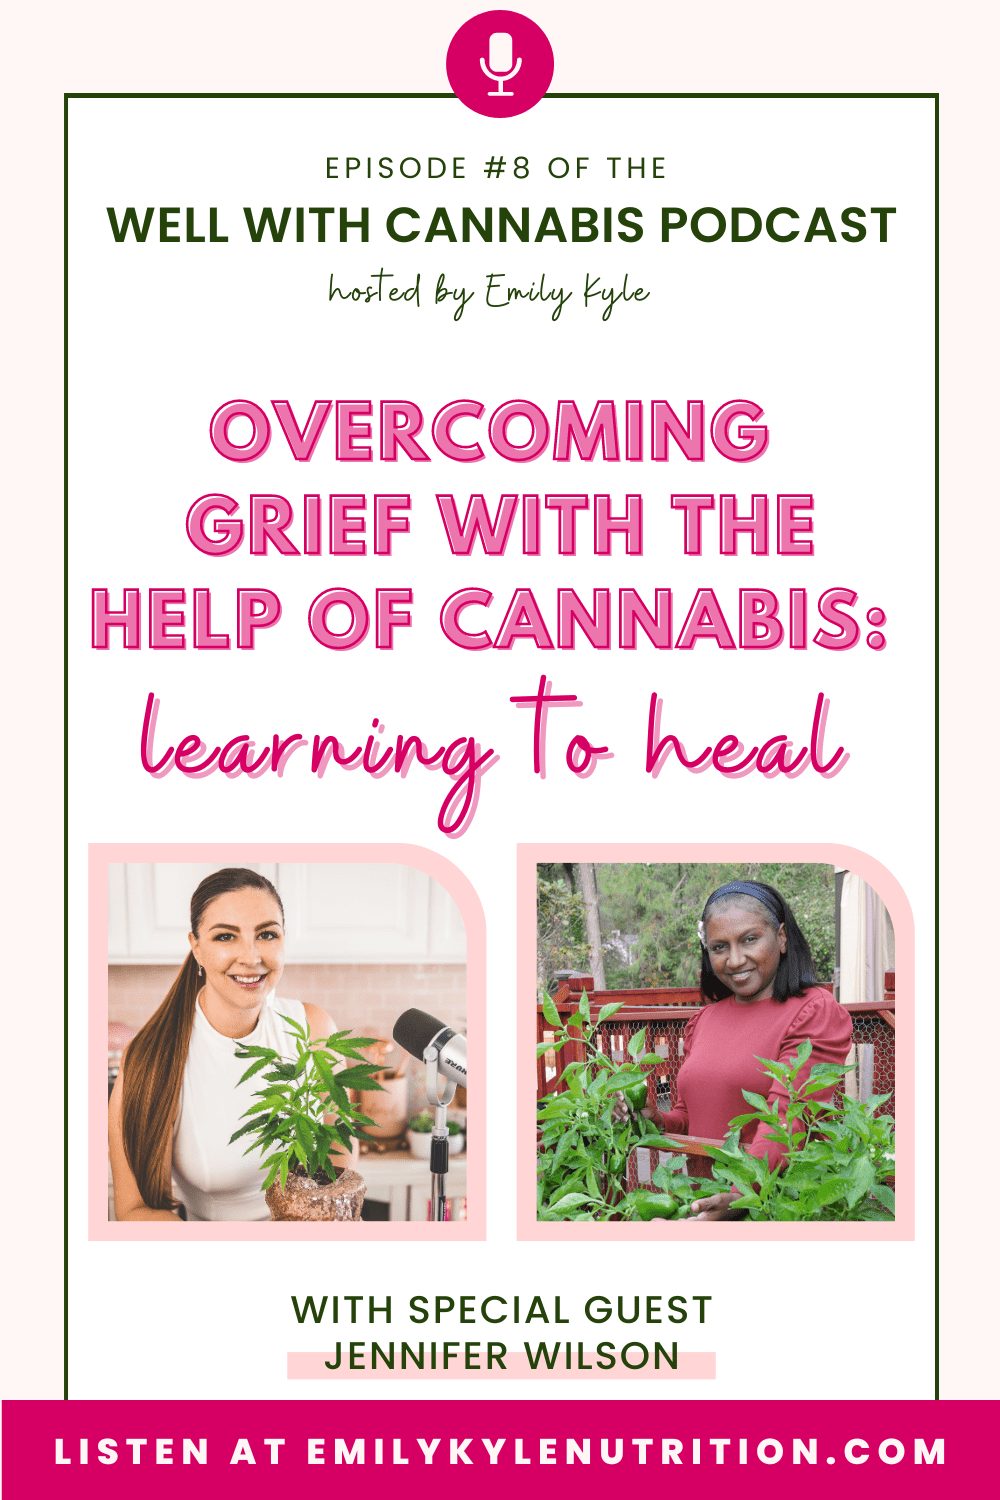 A picture of Jennifer Wilson with text that says overcoming grief with cannabis: learning to heal.